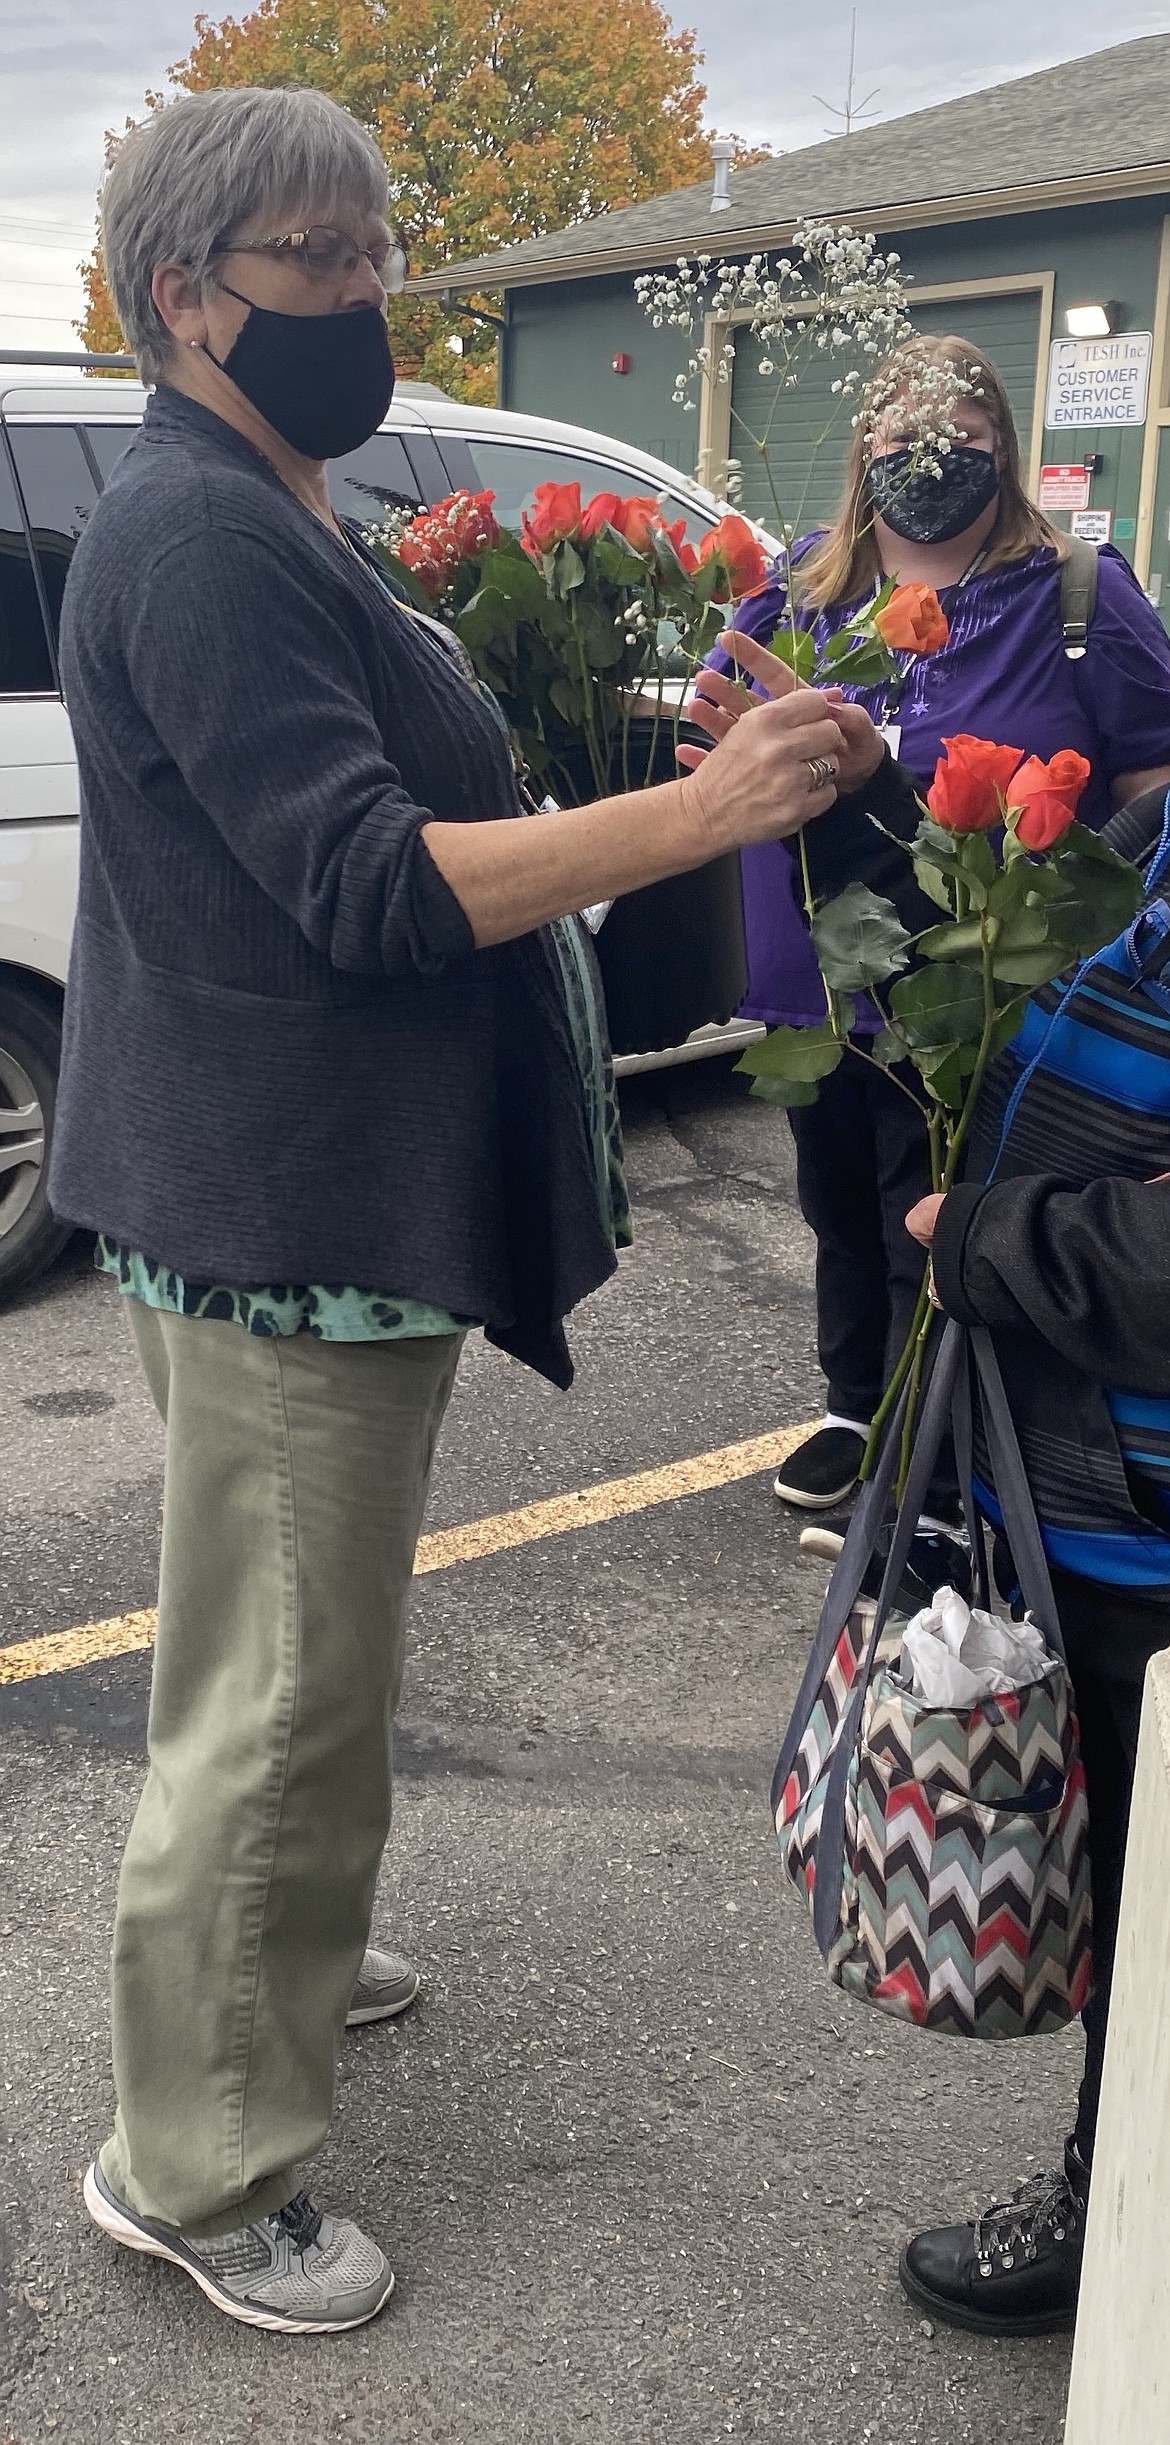 TESH teacher Kathie Gilman handed roses out Friday, as clients prepared to go home for the weekend.